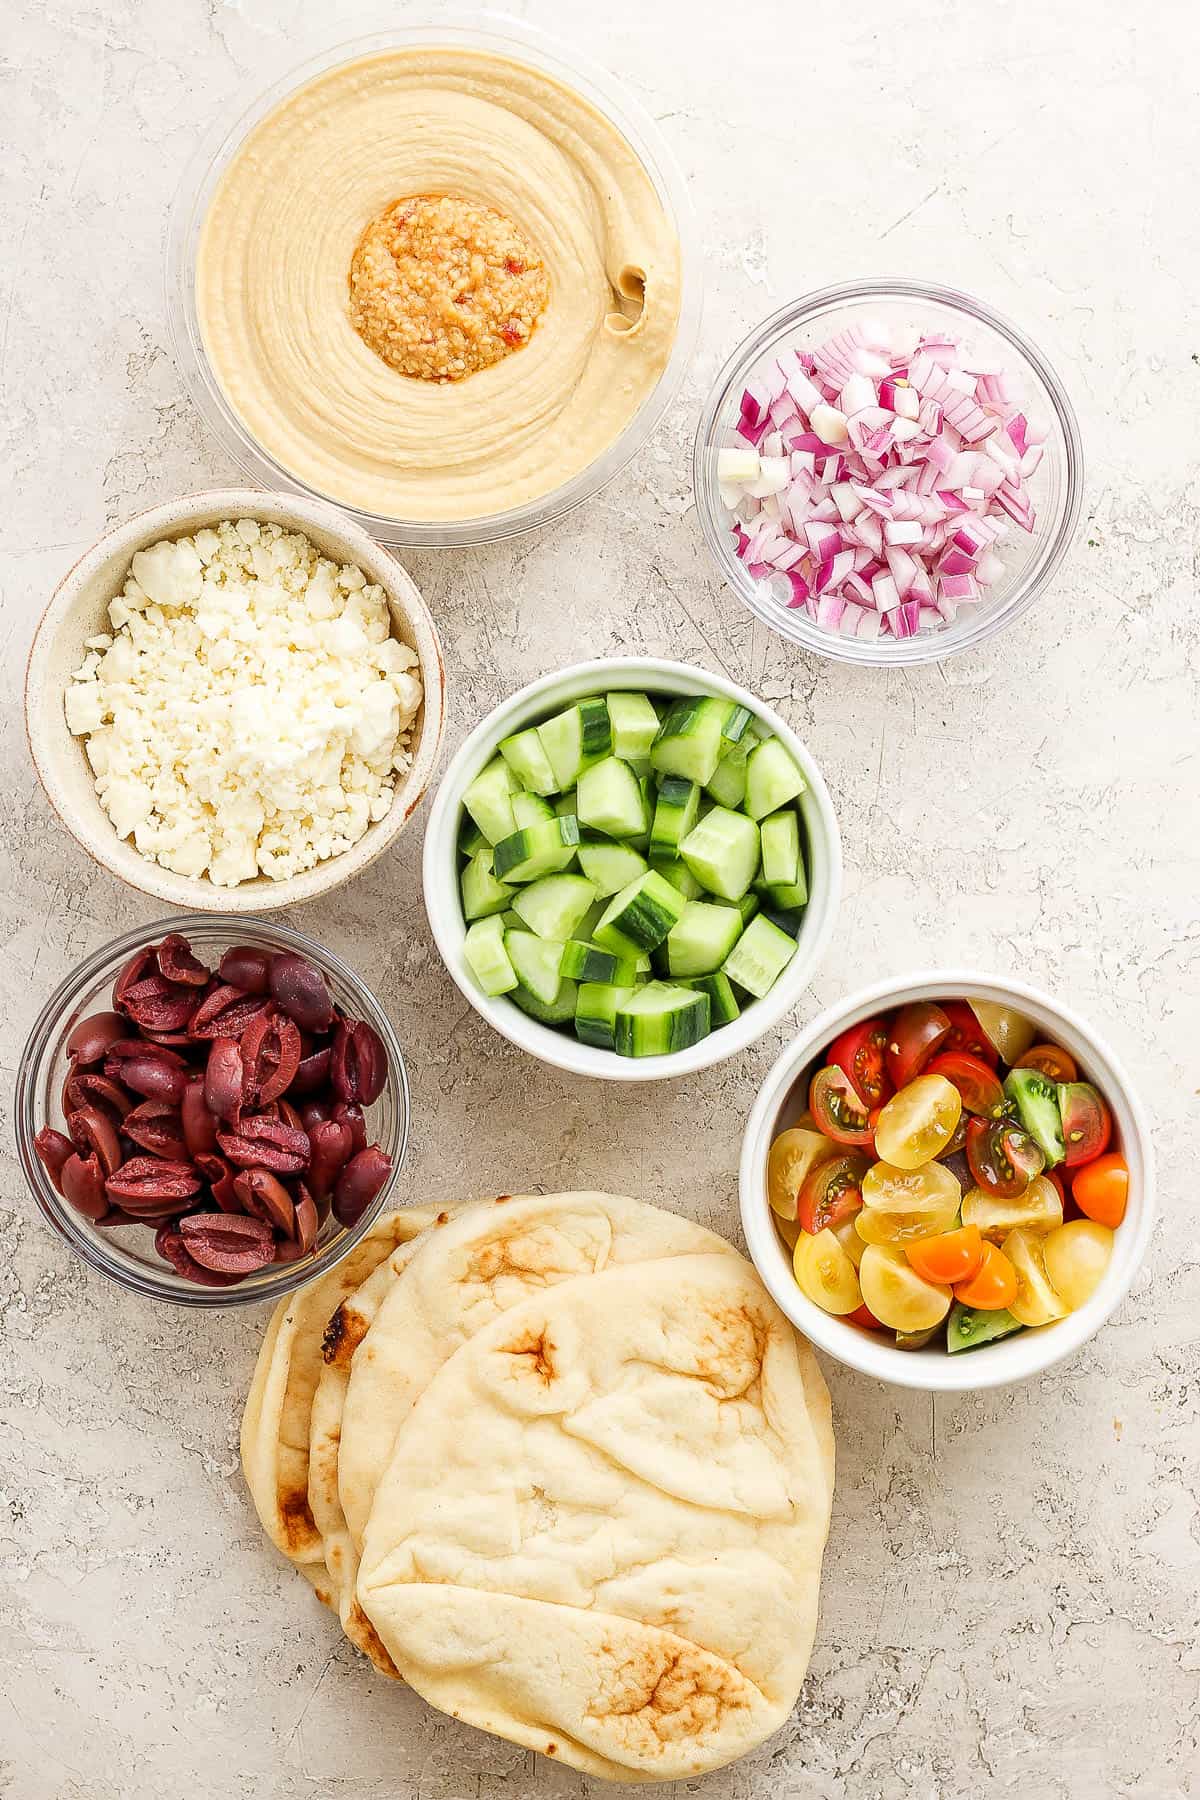 Individual containers of hummus, diced red onion, feta cheese, quartered and sliced cucumber, kalamata olives, halved cherry tomatoes, and naan bread.